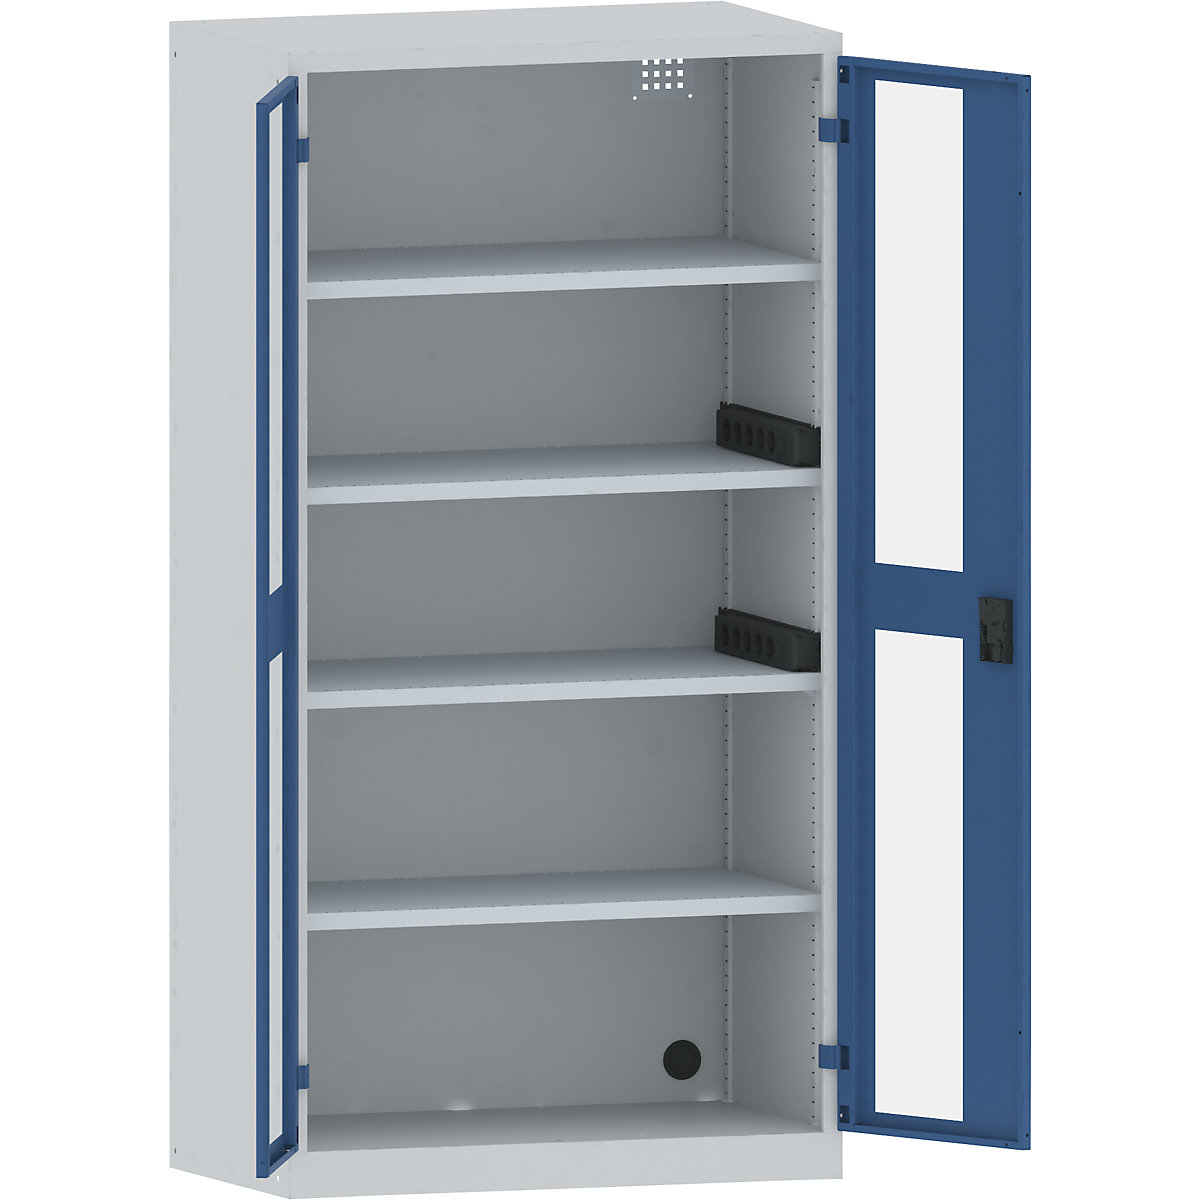 Battery charging cabinet – LISTA, 4 shelves, vision panel doors, 2 power strips at side, grey / blue-9